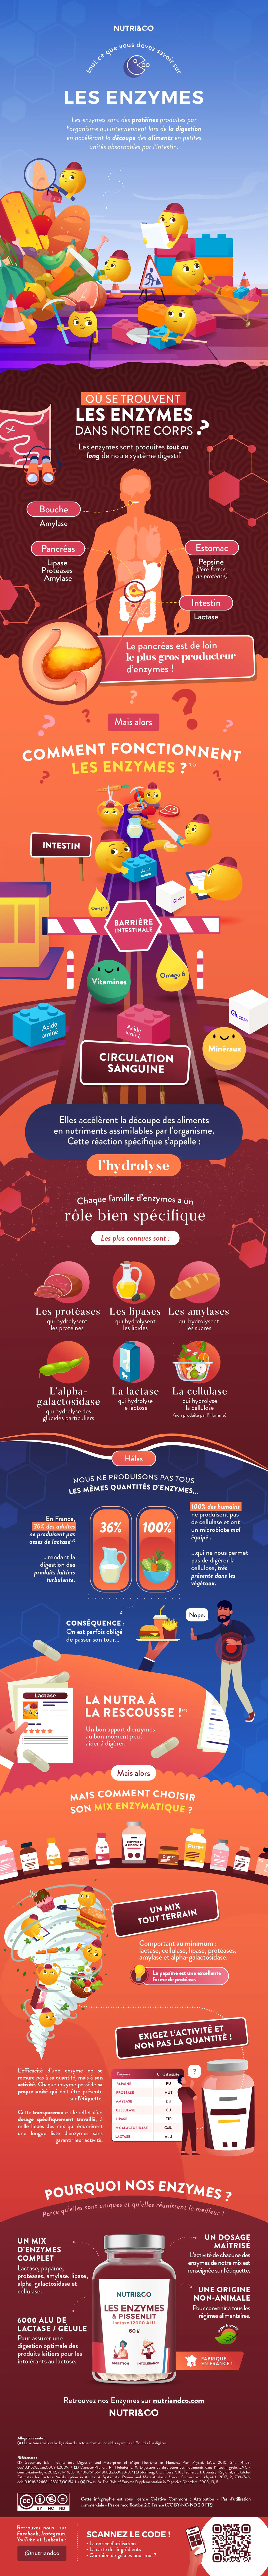 Infographie enzymes digestives